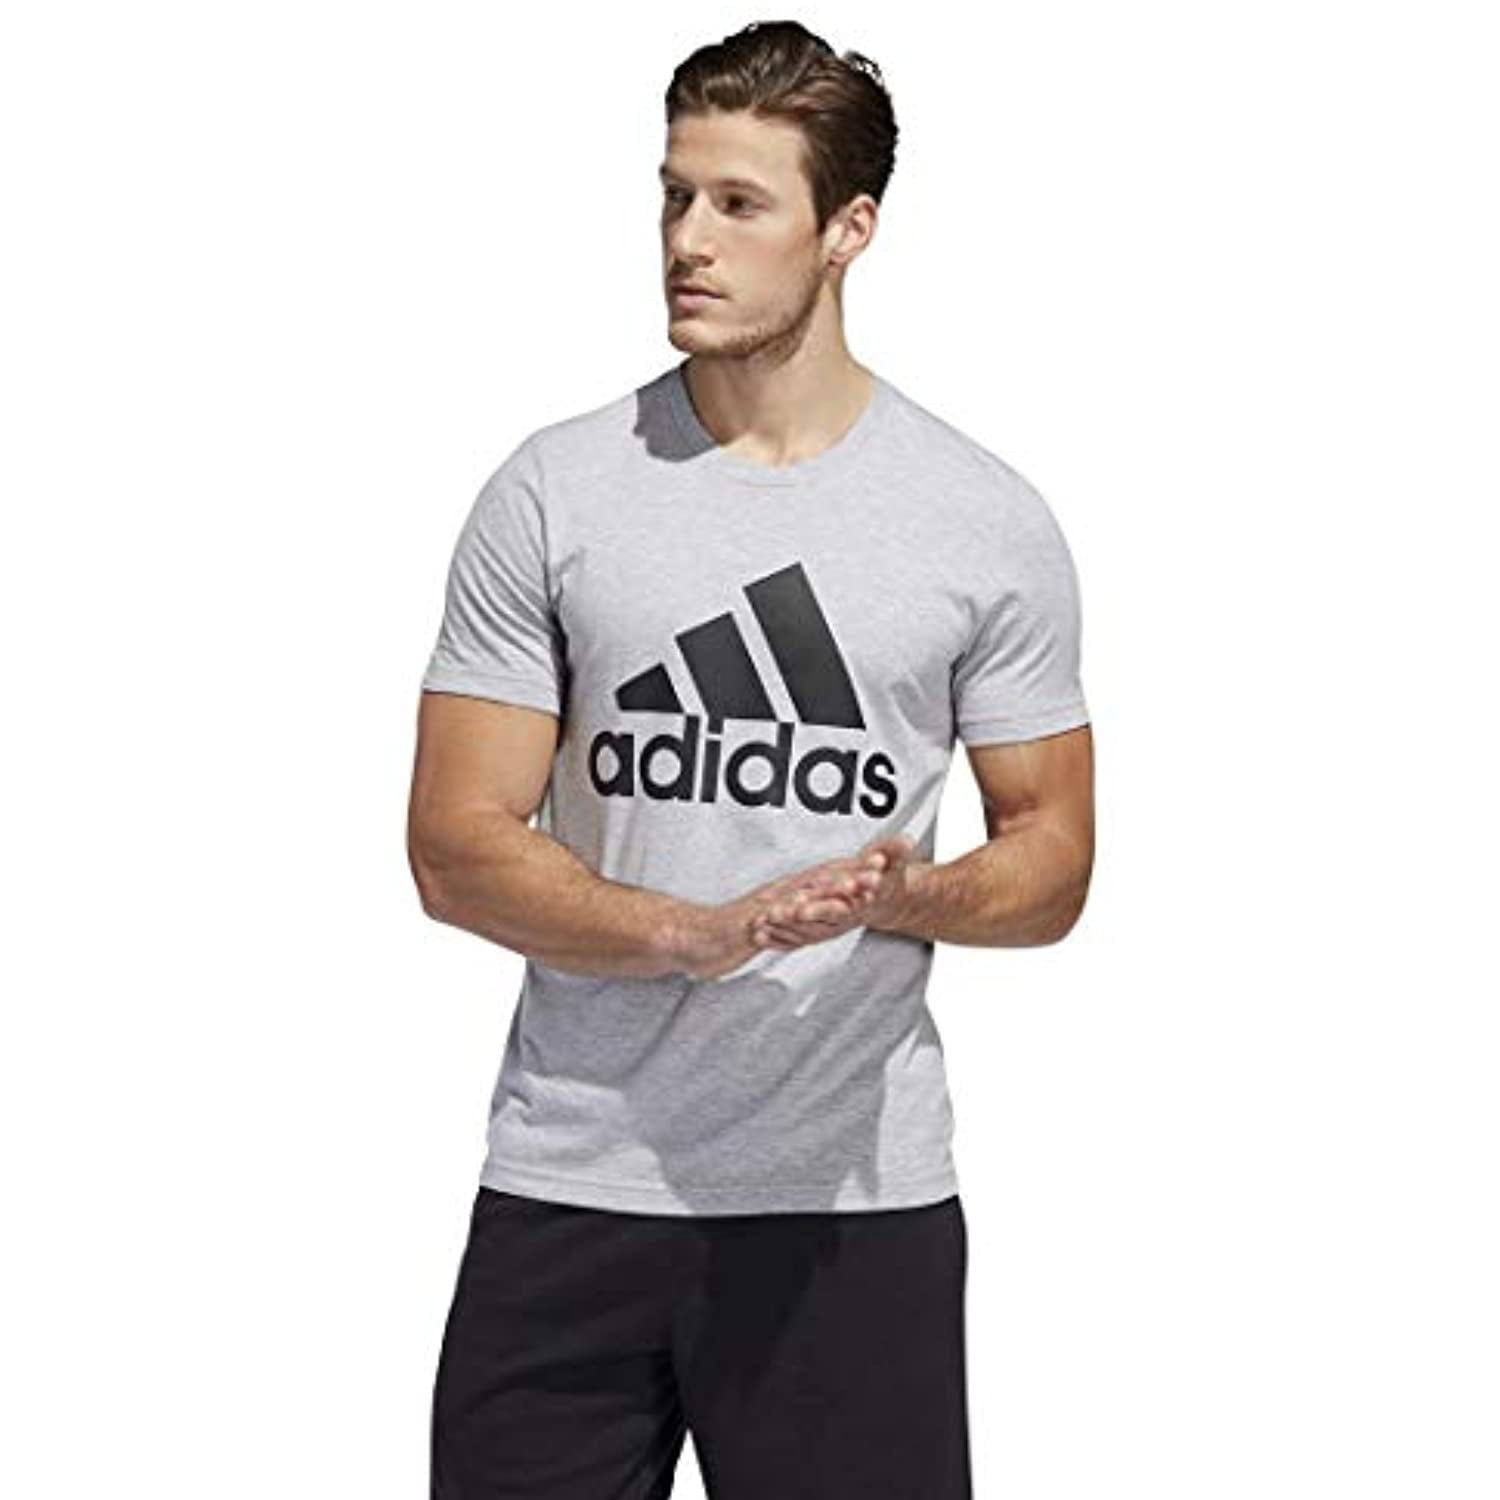 Adidas Men's Basic Bos Tee Sport Shirt T-Shirt Athletic Work Out